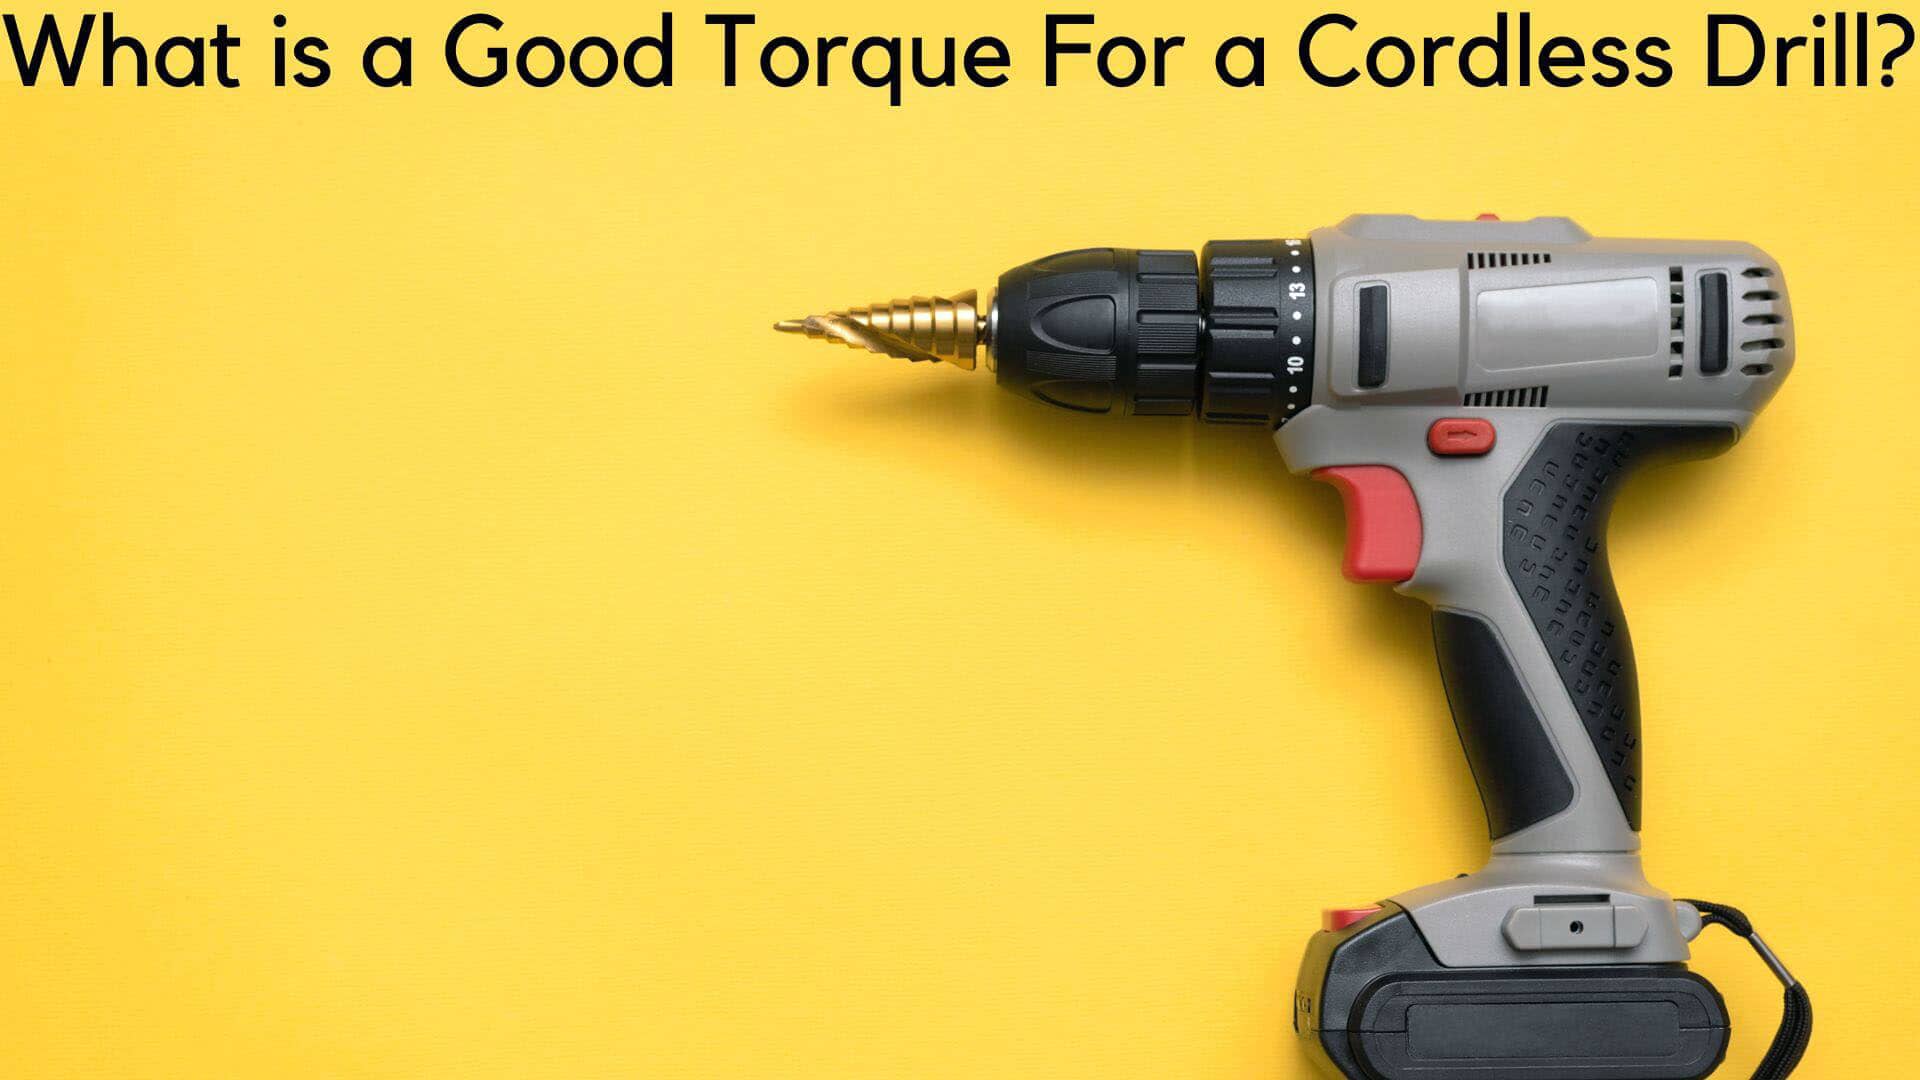 What is a Good Torque For a Cordless Drill?